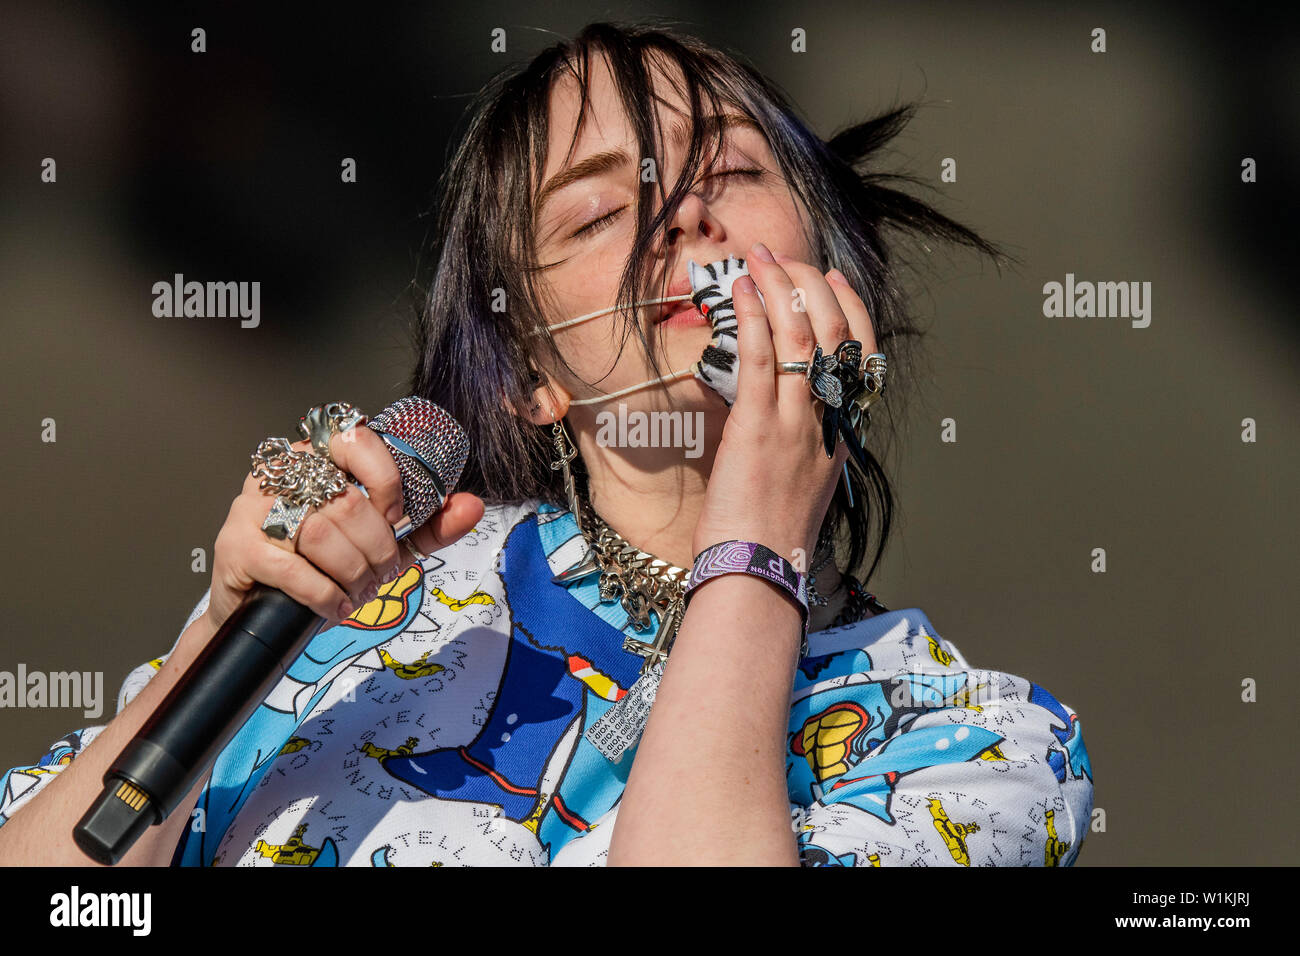 Billie Eilish's blue hair and outfit at the 2019 Glastonbury Festival - wide 7